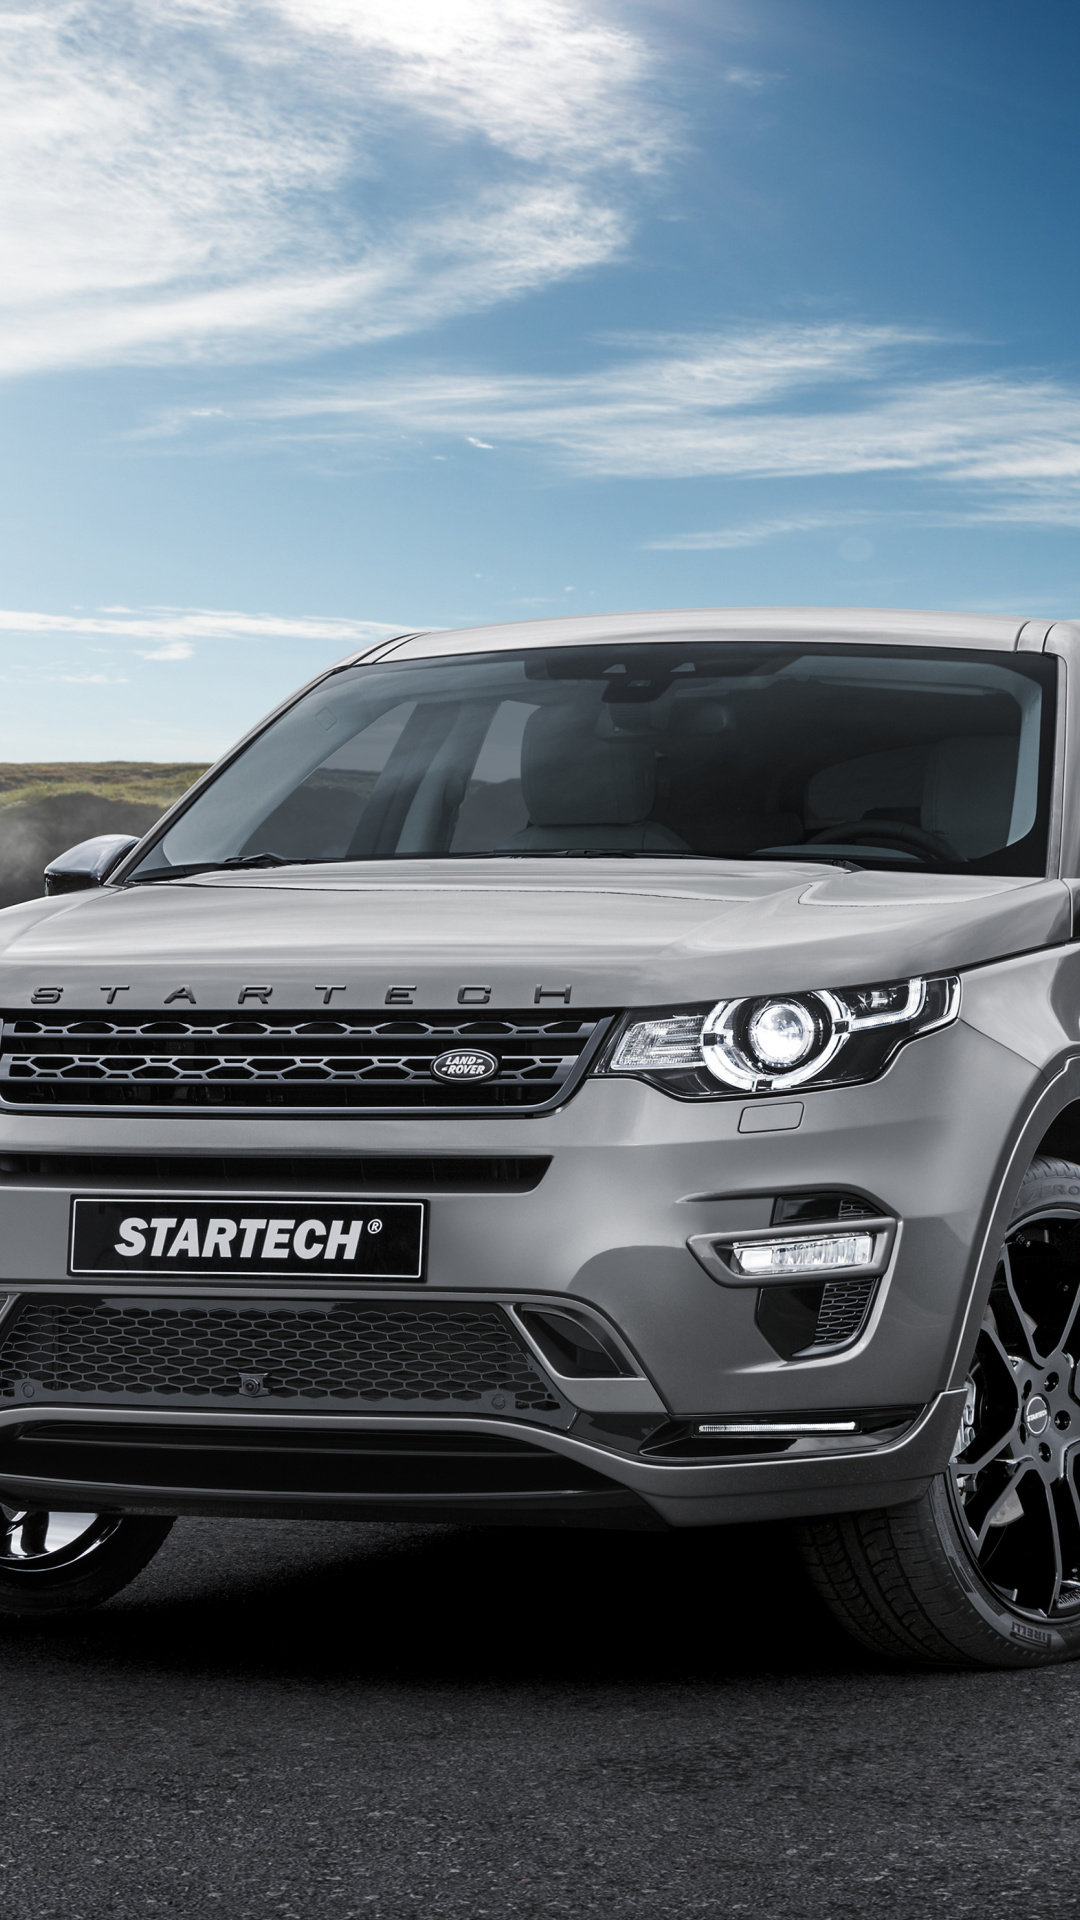 Land Rover Discovery Sport wallpaper 1080x1920